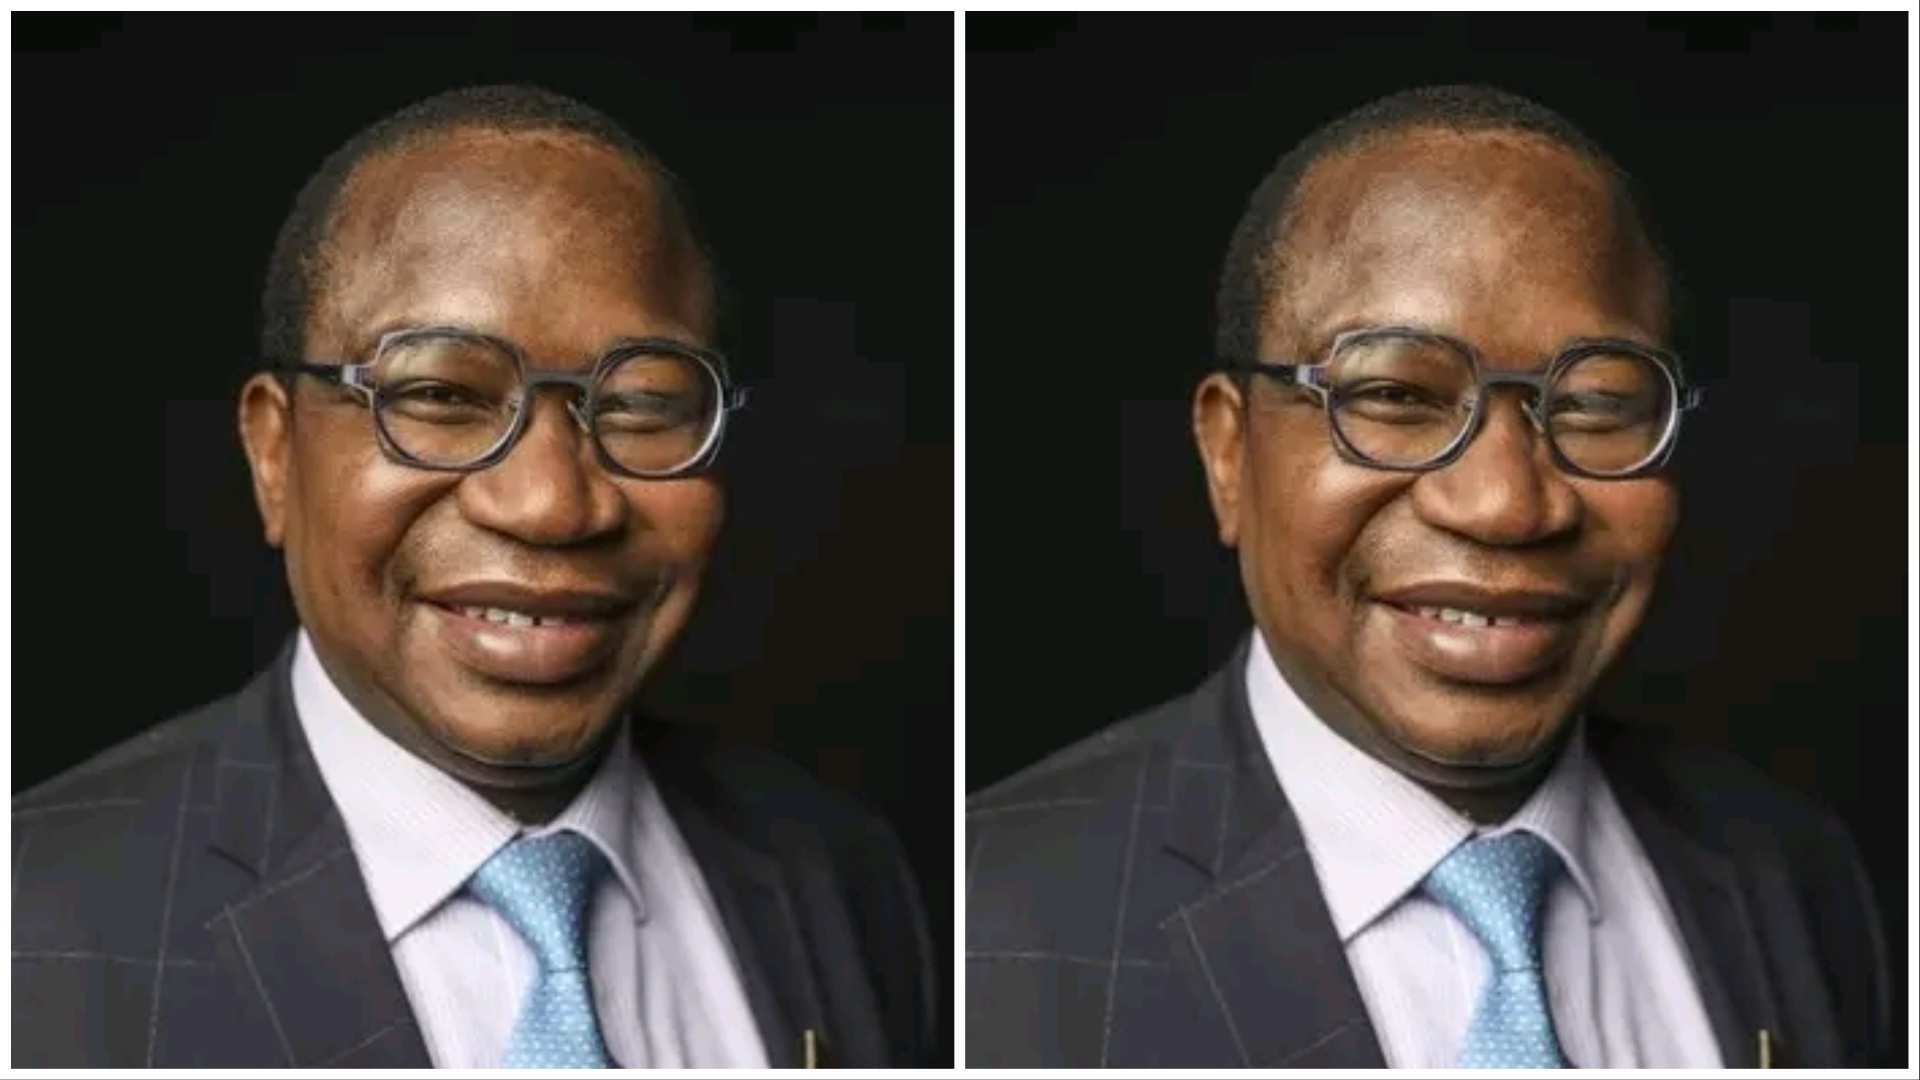 Mthuli Ncube Biography| Age, Education, Personal Life, Academic Career, Finance Minister, African Development Bank, Political Career